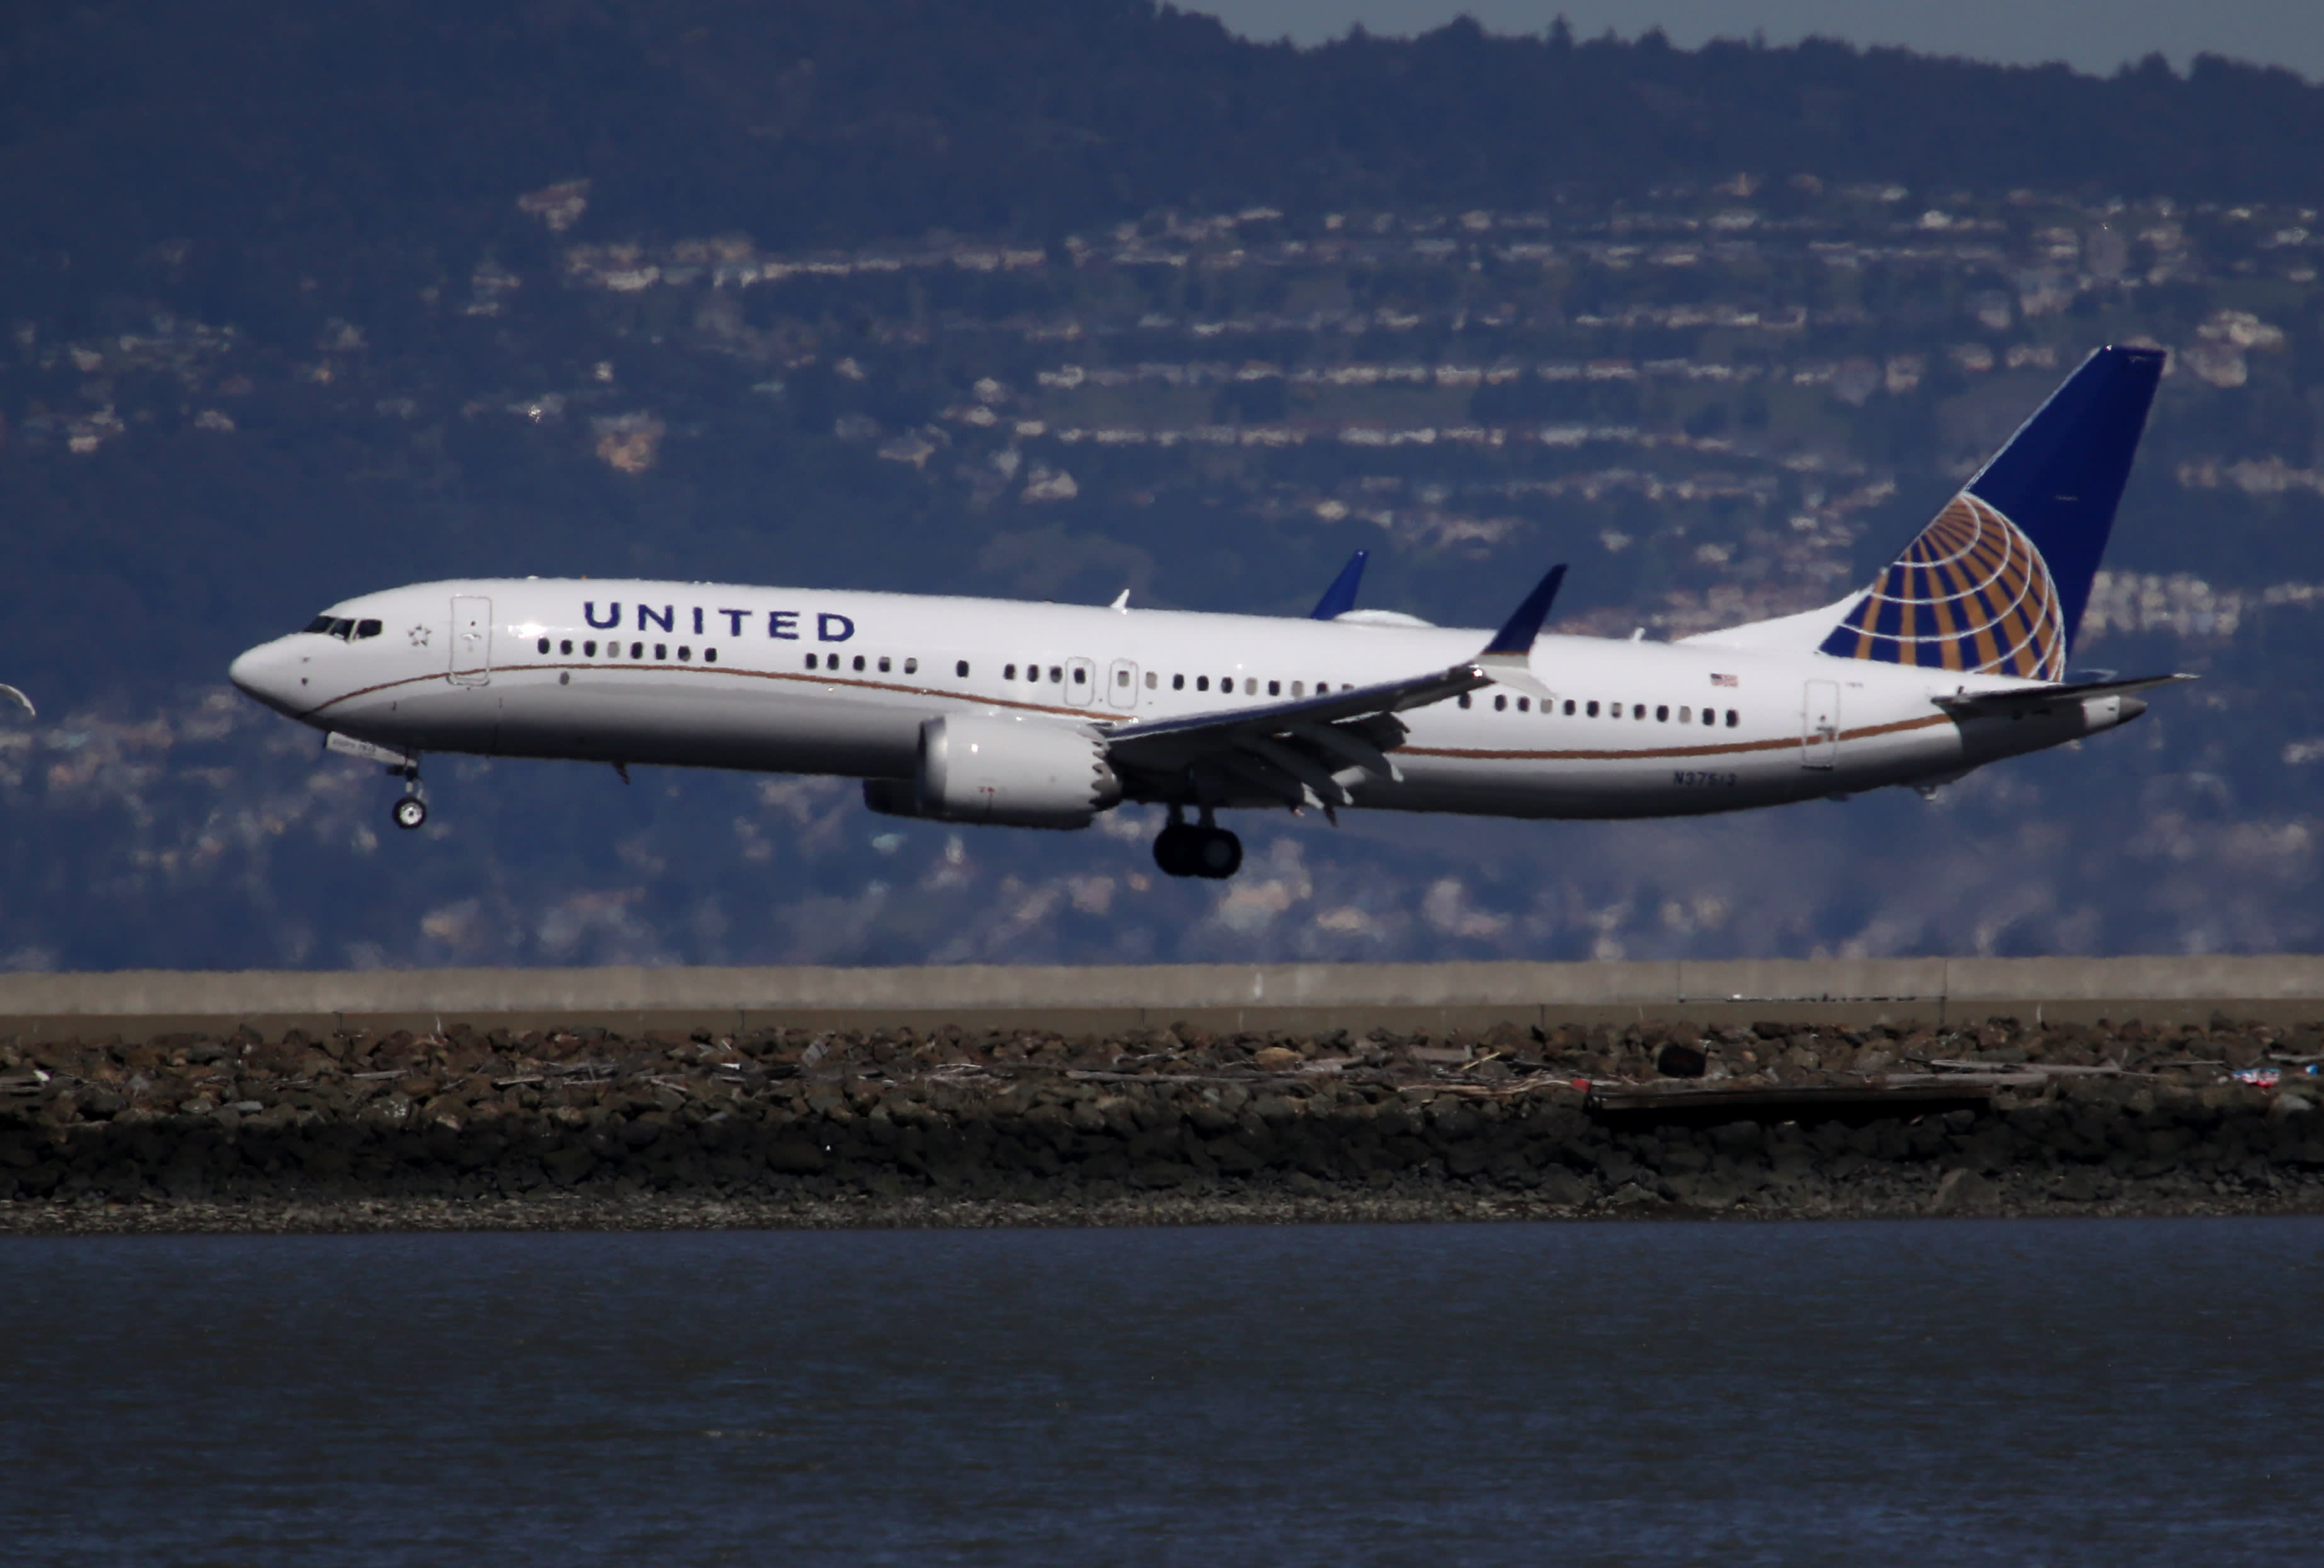 United Airlines (UAL)’s results 1Q21